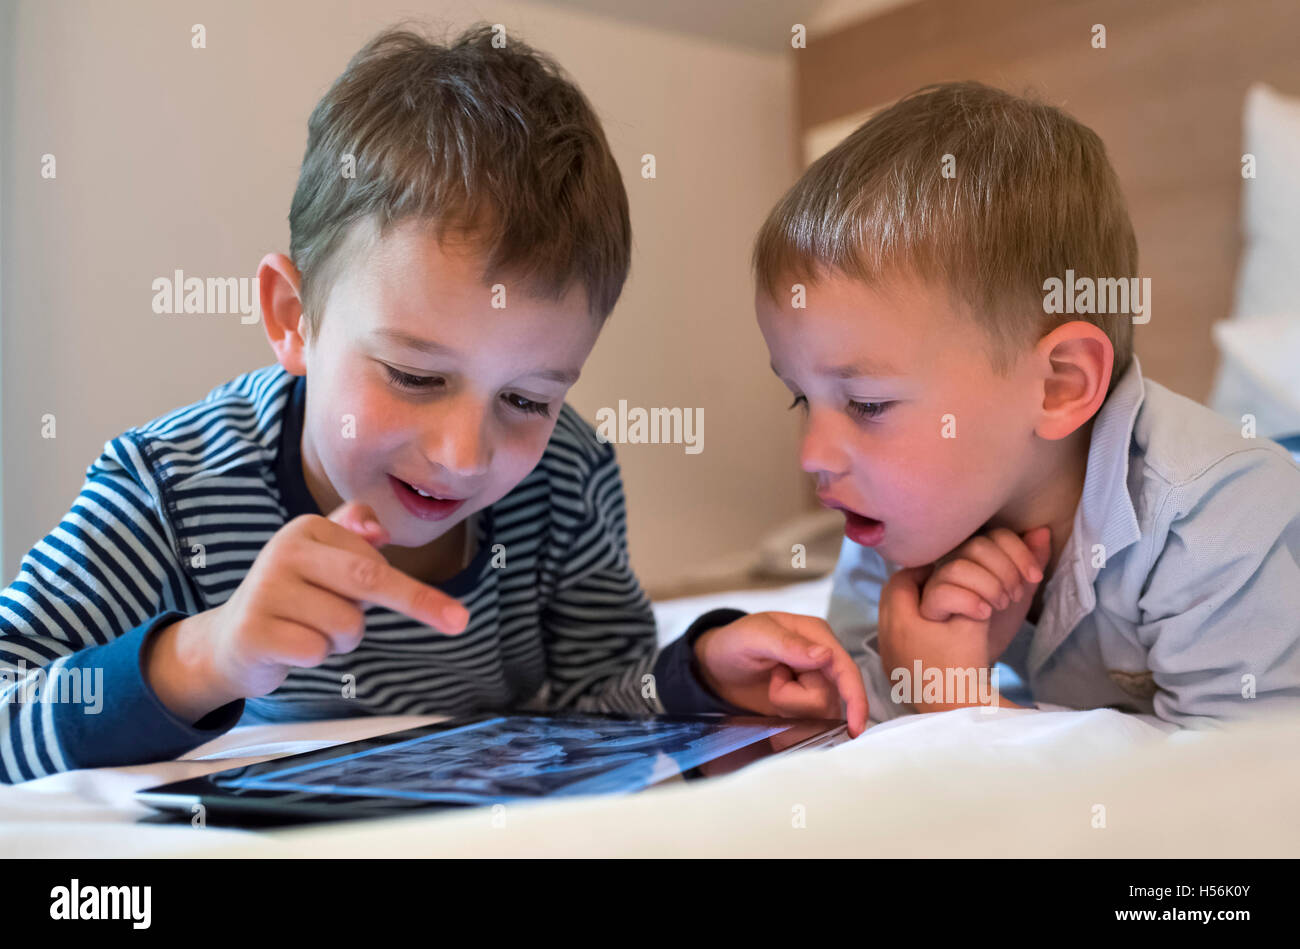 Two boys, siblings lying on a bed and playing with an iPad, Tablet PC Stock Photo